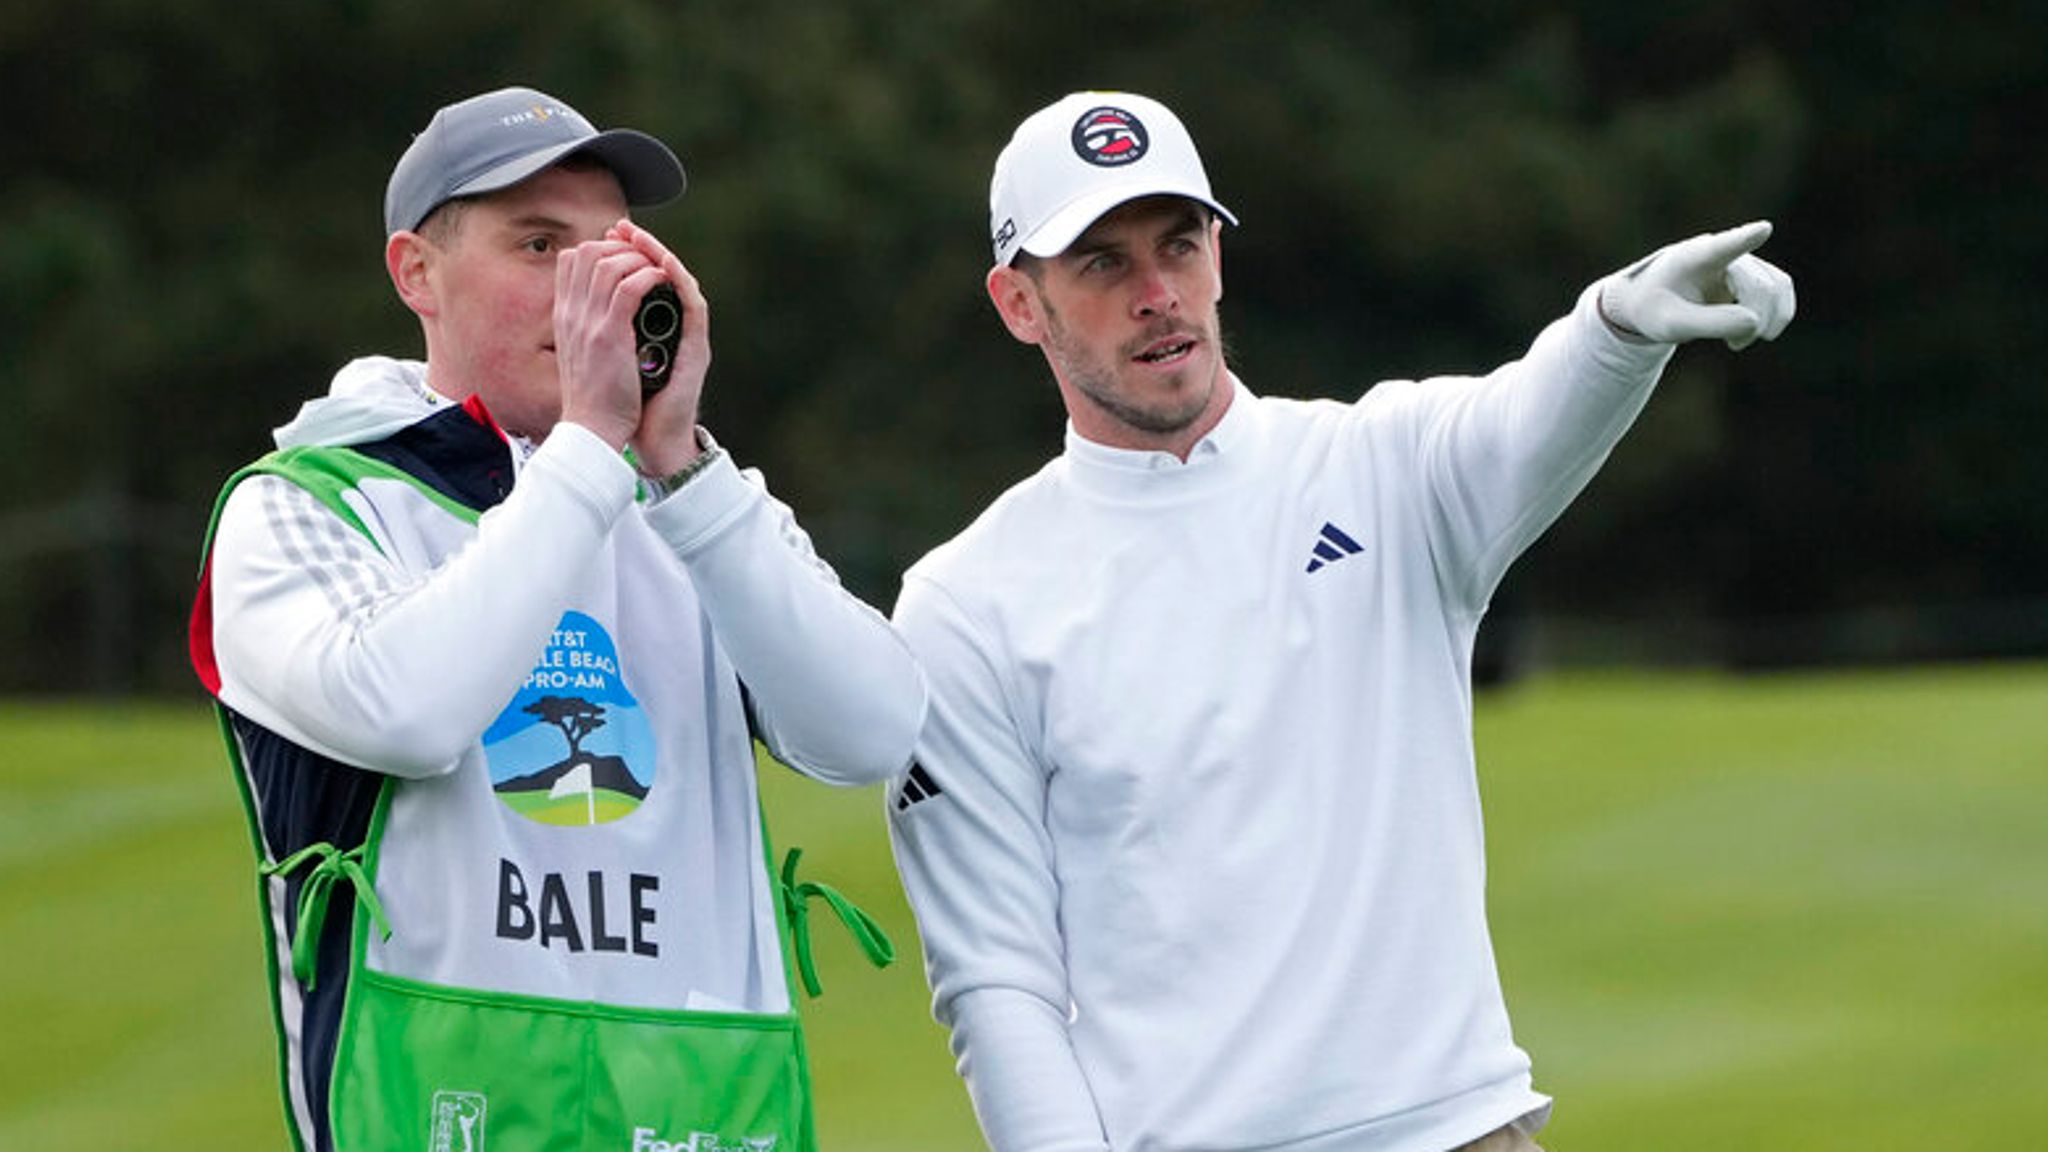 Gareth Bale admits suffering first-tee nerves but impresses at ATandT Pebble Beach Pro-Am Golf News Sky Sports